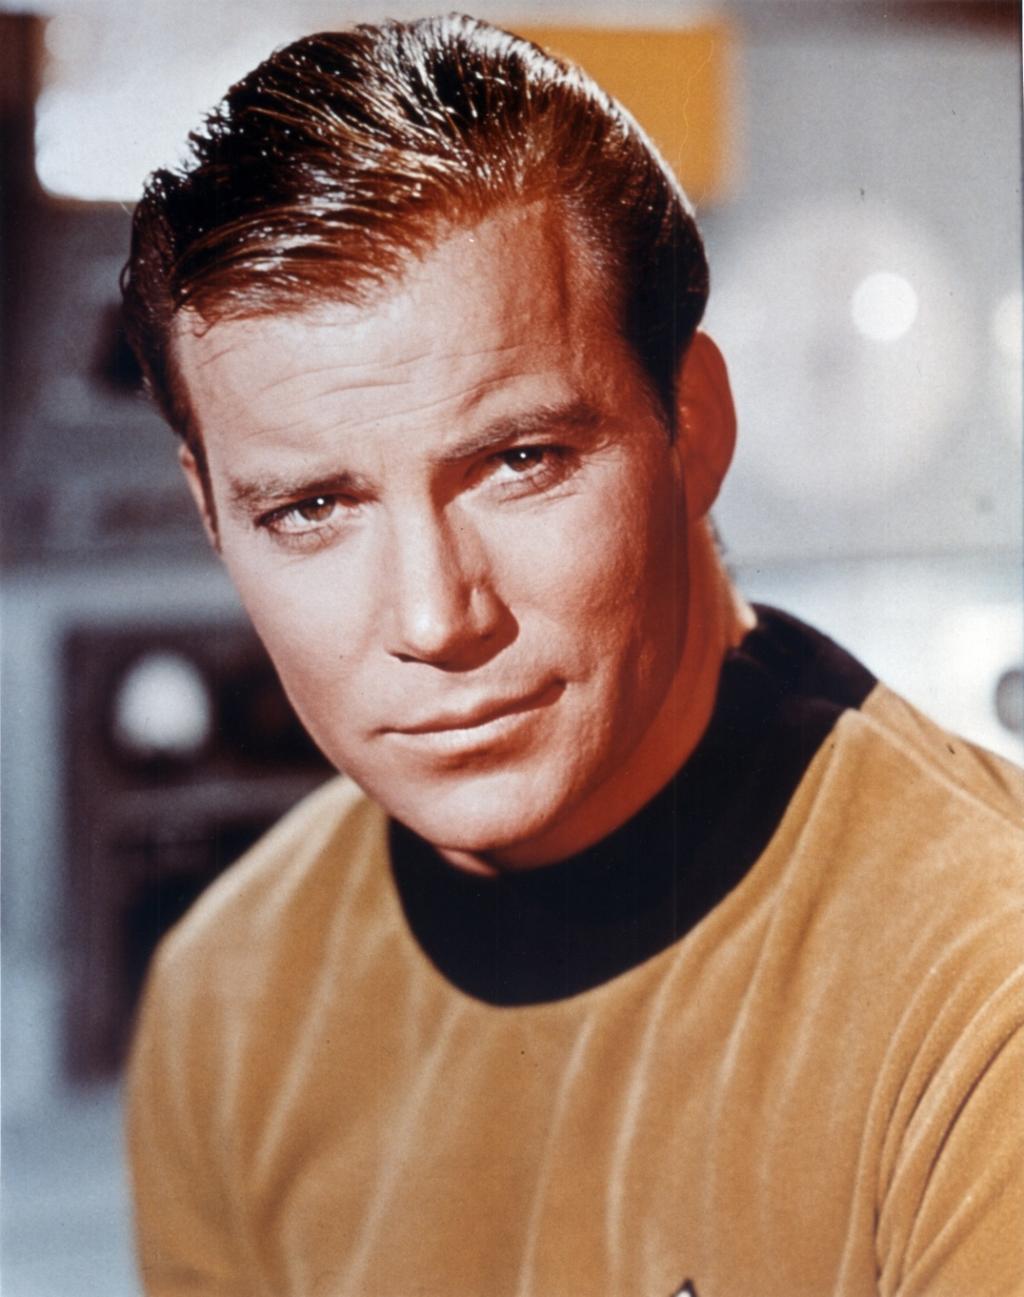 Polymorphism StarTrek: Captain Kirk was in trouble, as usual. He met an extremely beautiful lady who, however, later on changed into a hideous troll.